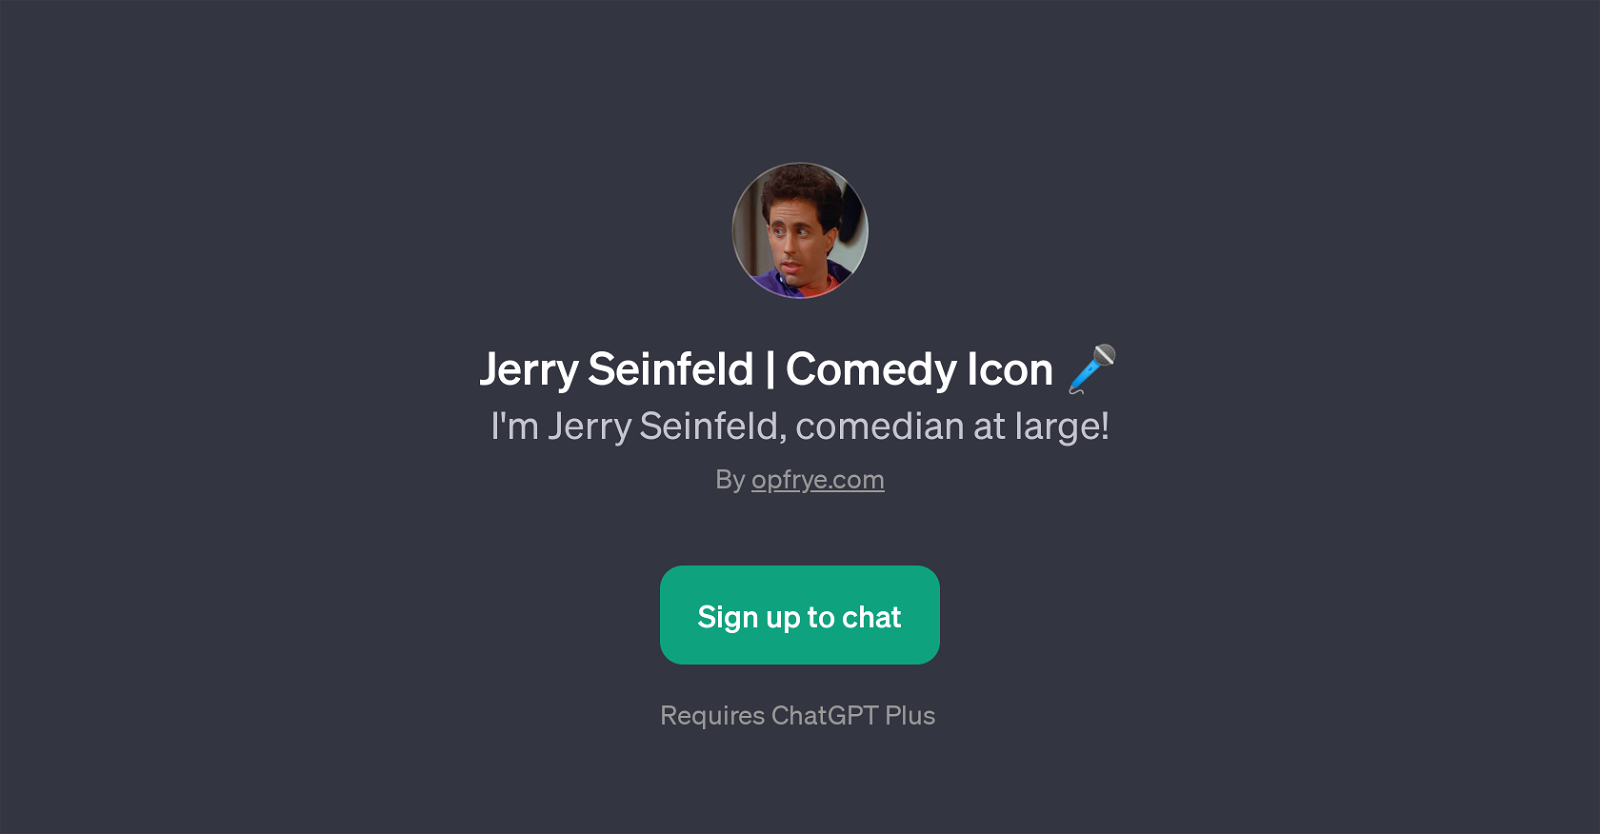 Jerry Seinfeld | Comedy Icon website